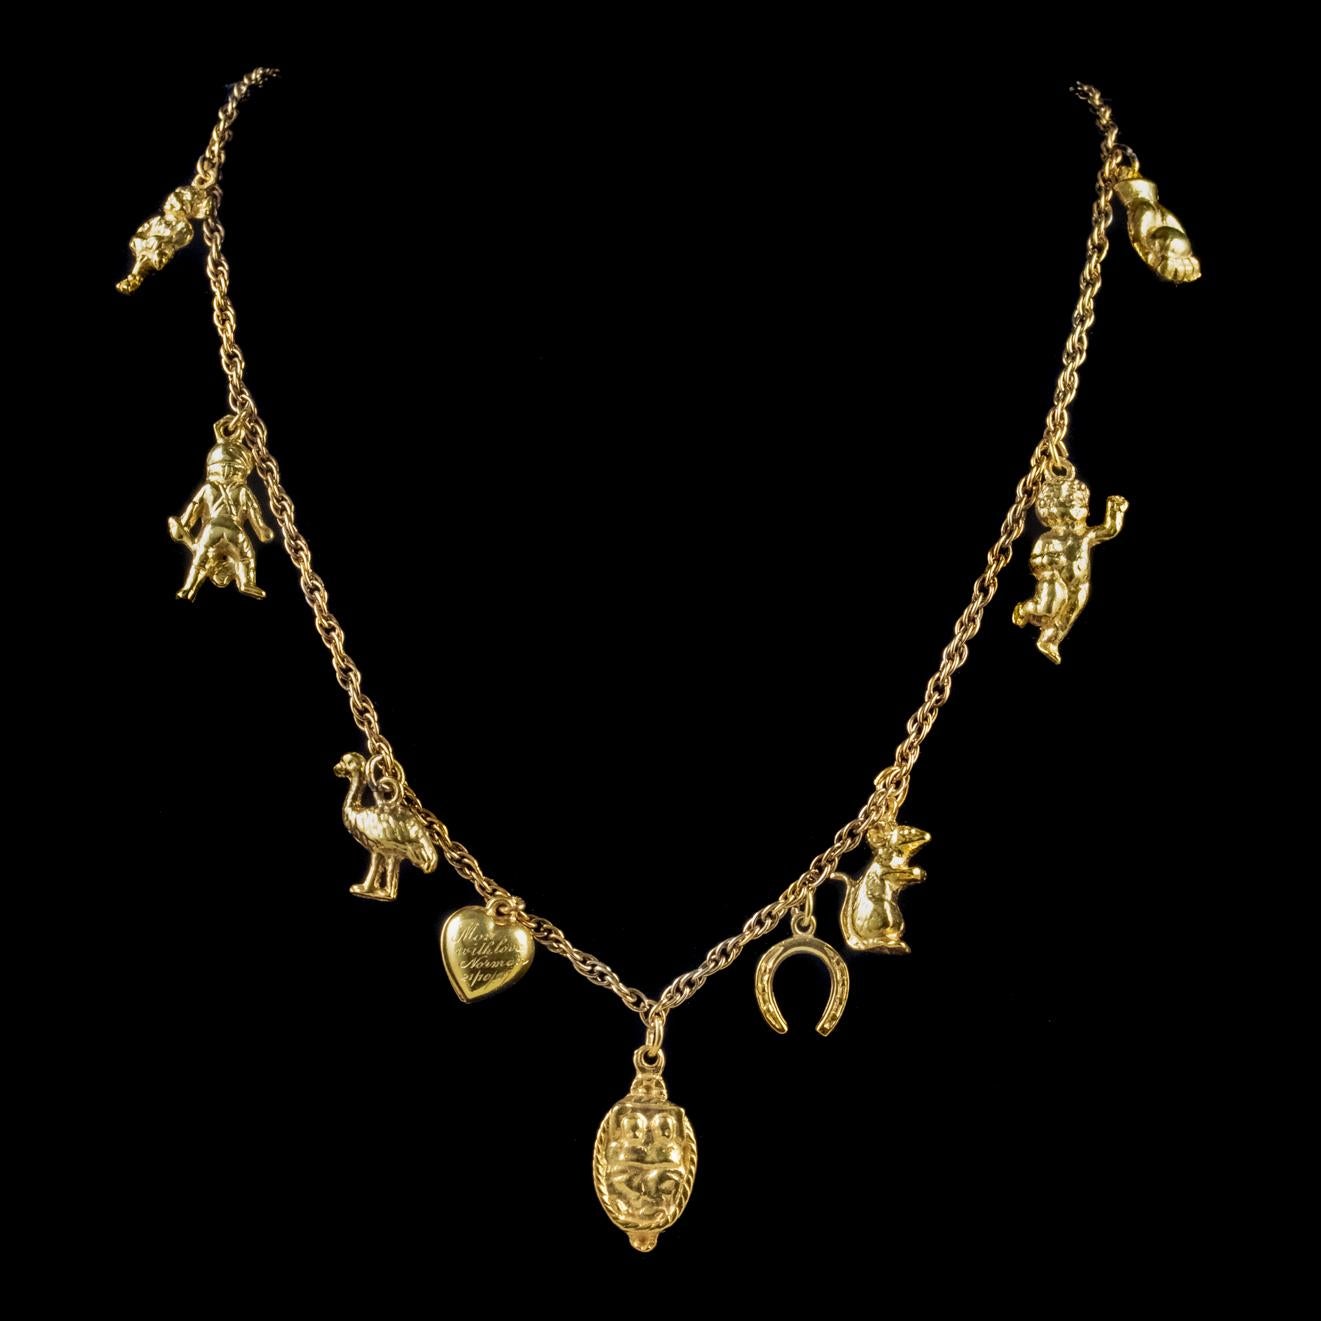 Vintage Charm Necklace 18 Carat Gold Gilt Silver Chain, circa 1947 In Good Condition For Sale In Lancaster, Lancashire